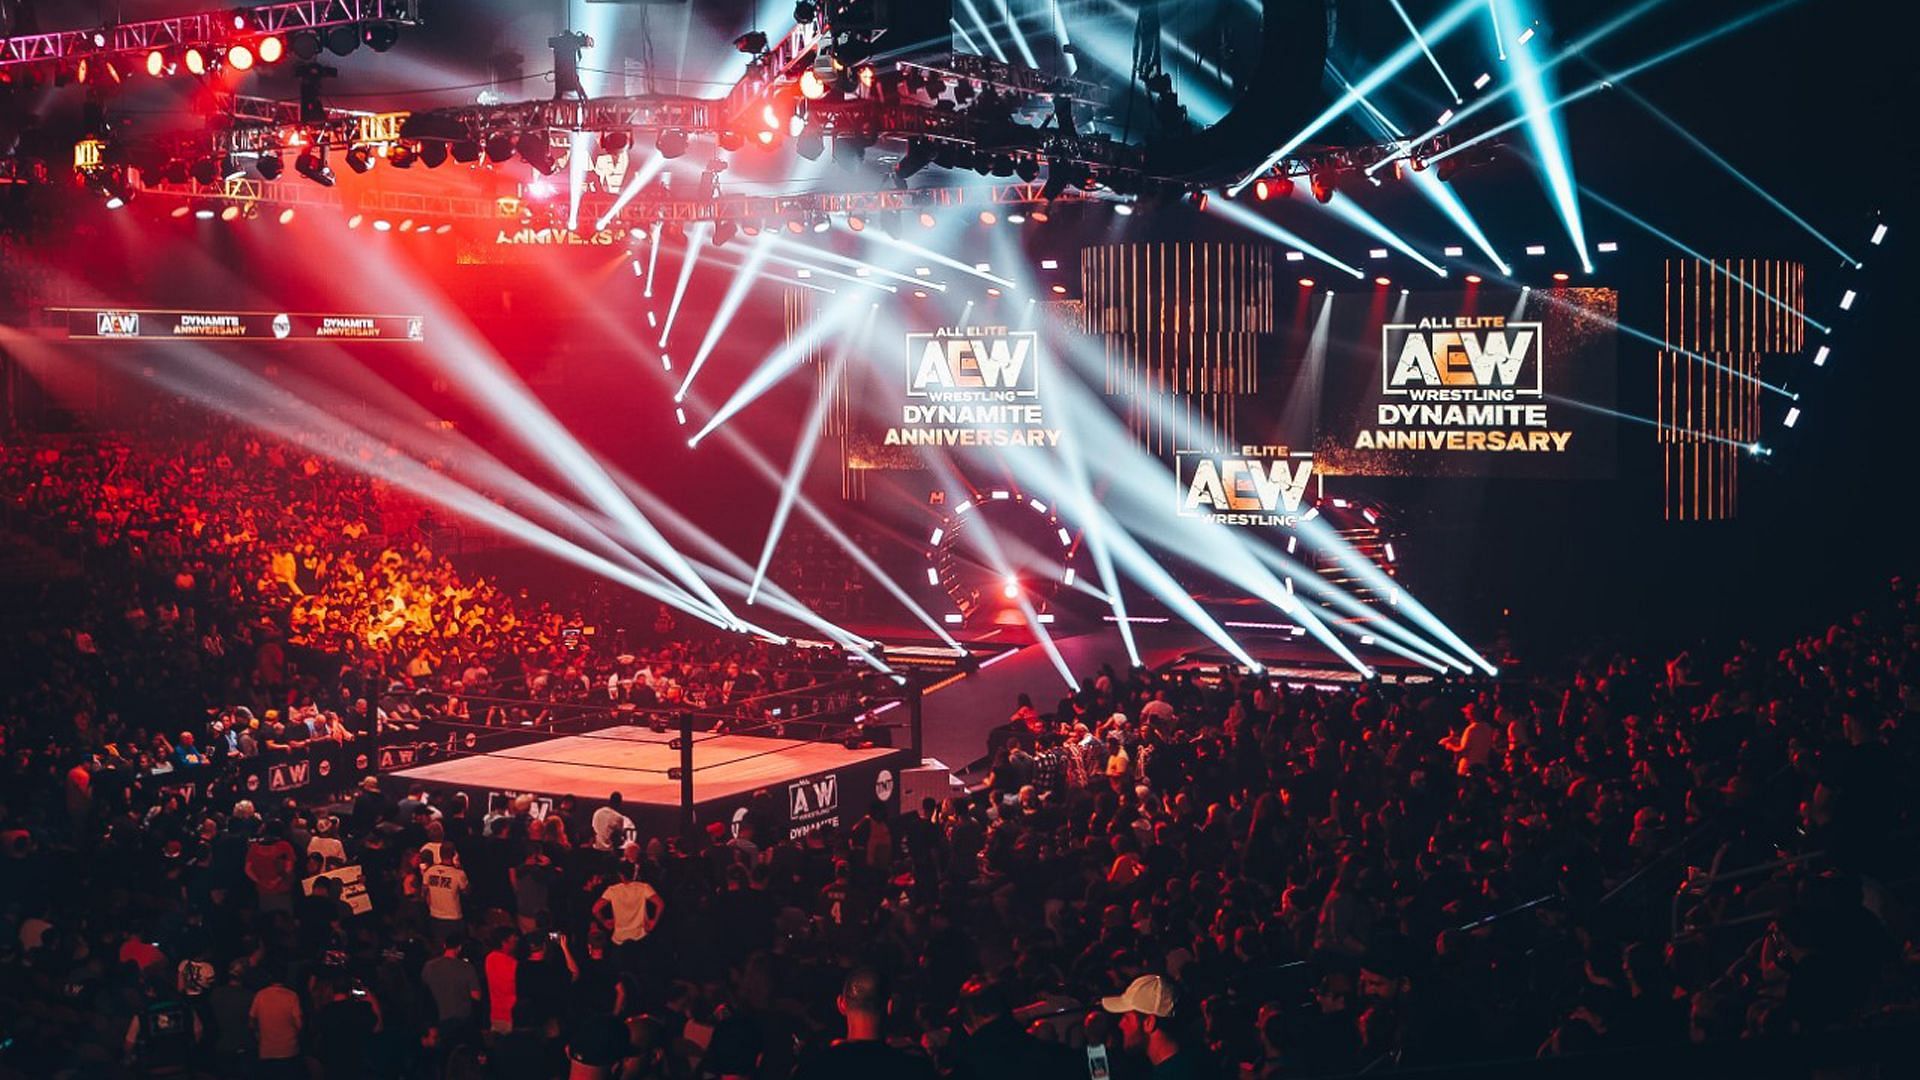 AEW has gathered a dream team for its production staff